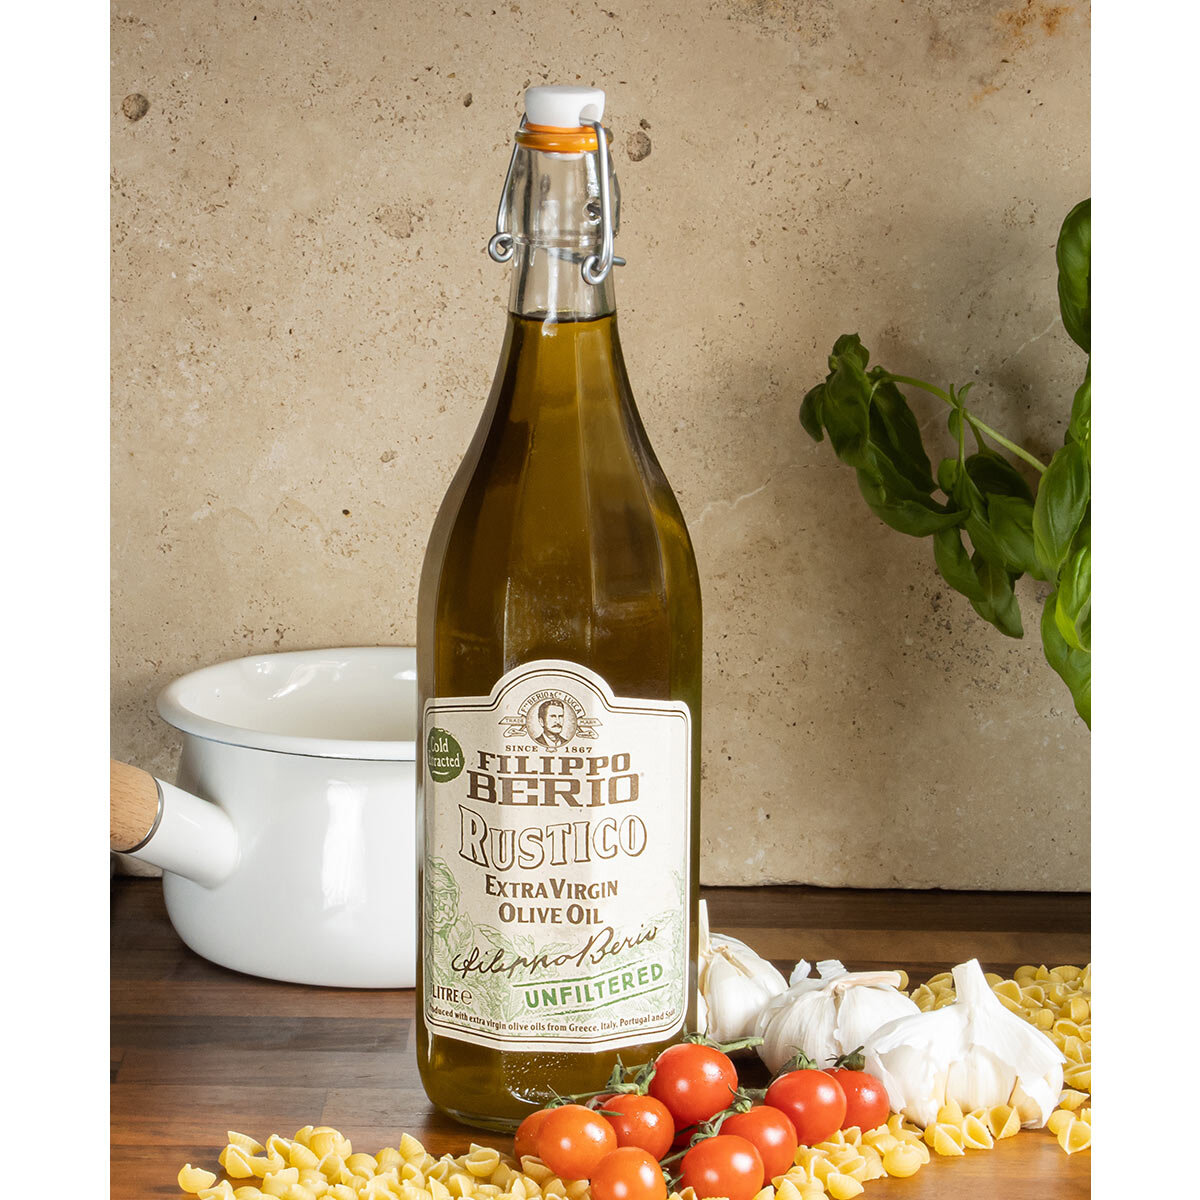 Bottle On A Table With Tomatoes and Pasta